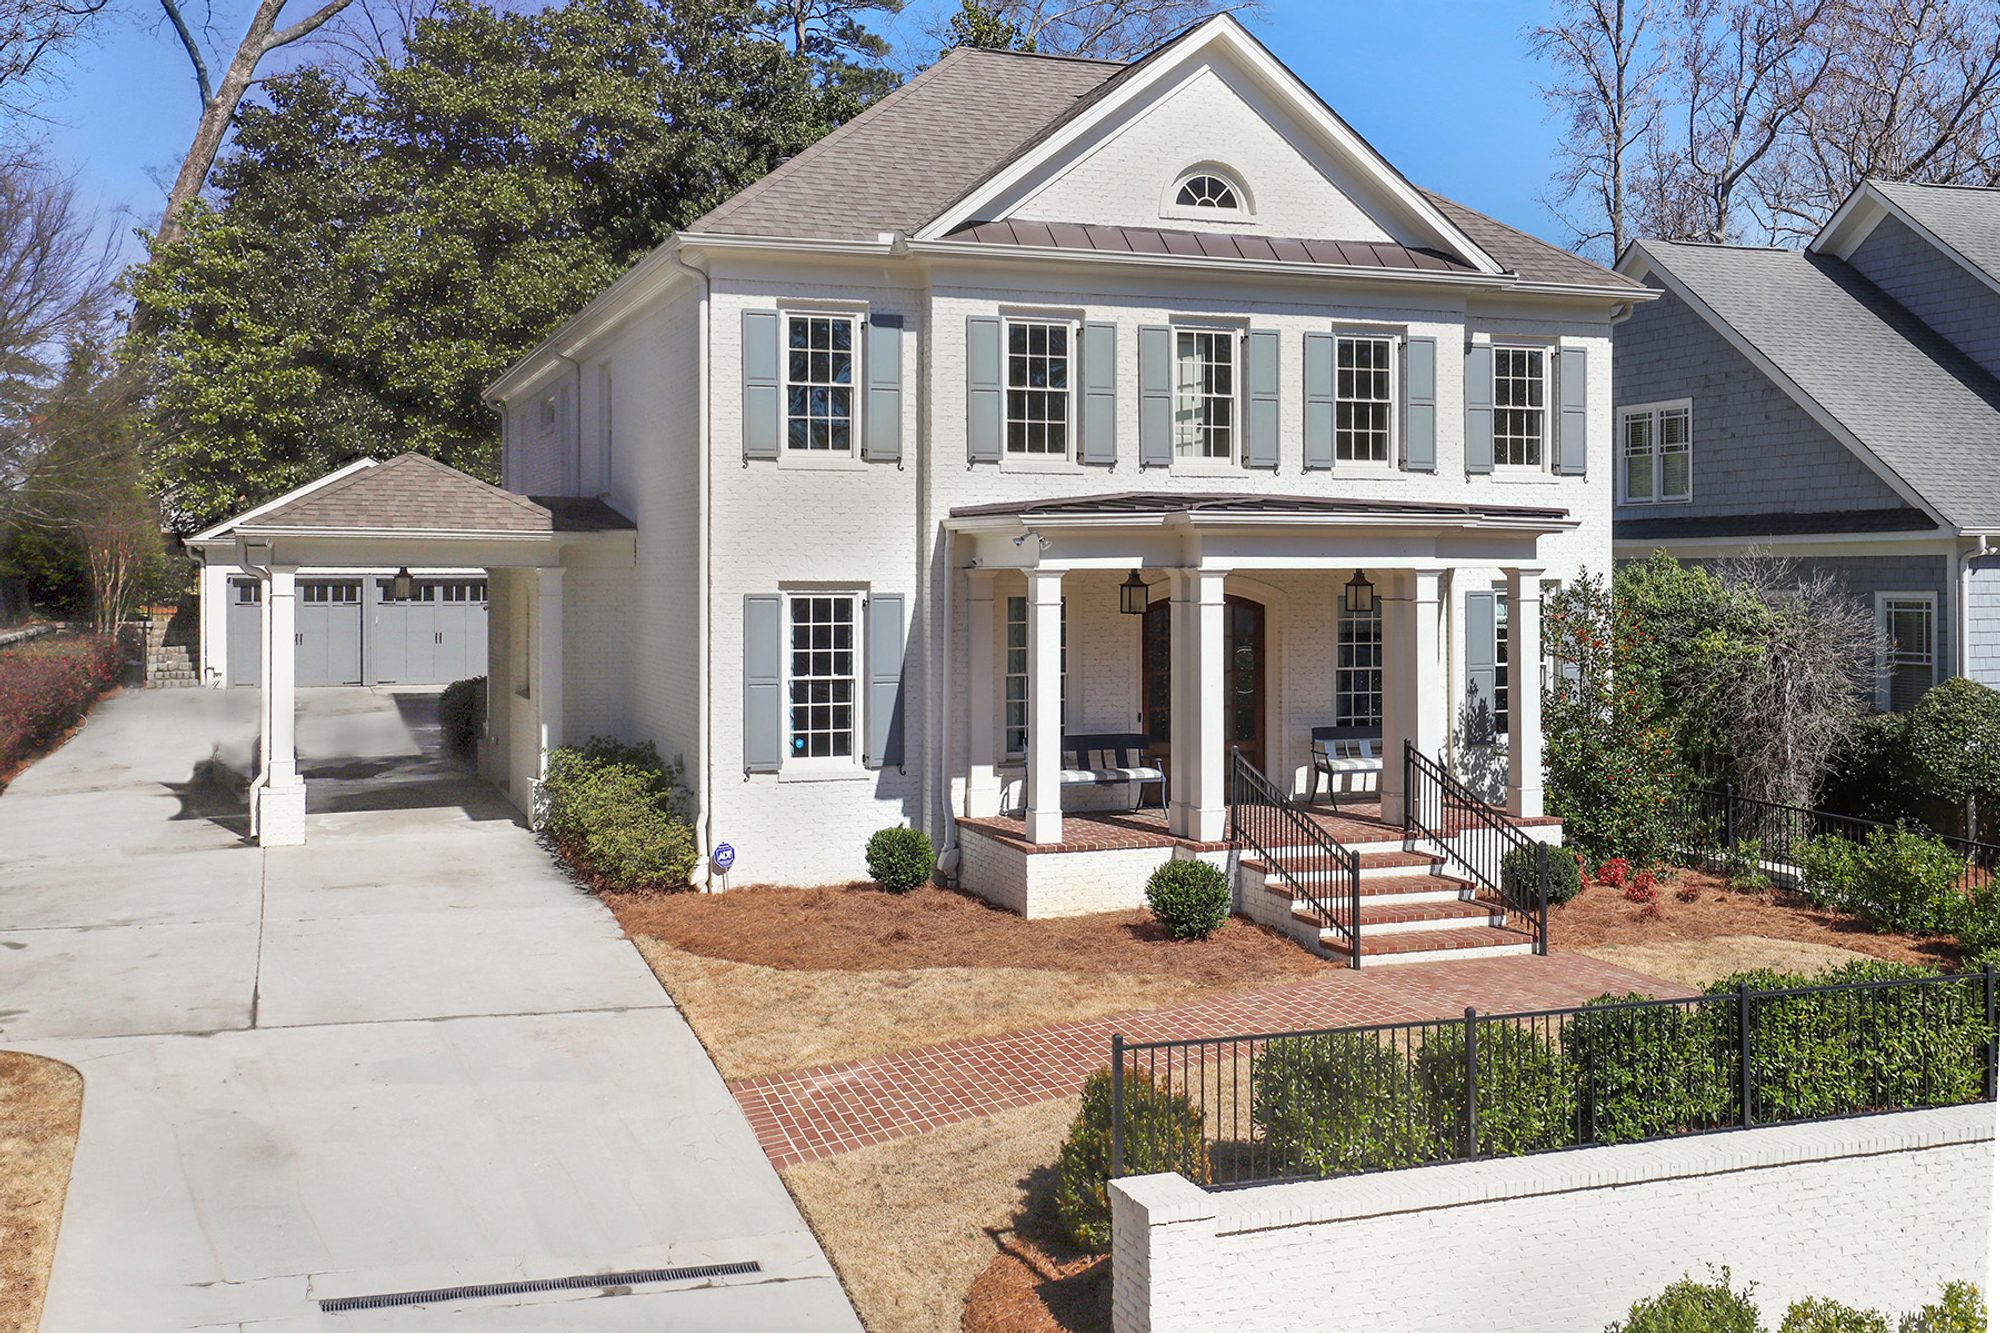 Beautiful white brick house with red brick front porch, steps and walkway. Detached white brick garage. Blue shutters and matching garage doors. Arched top wood front door.